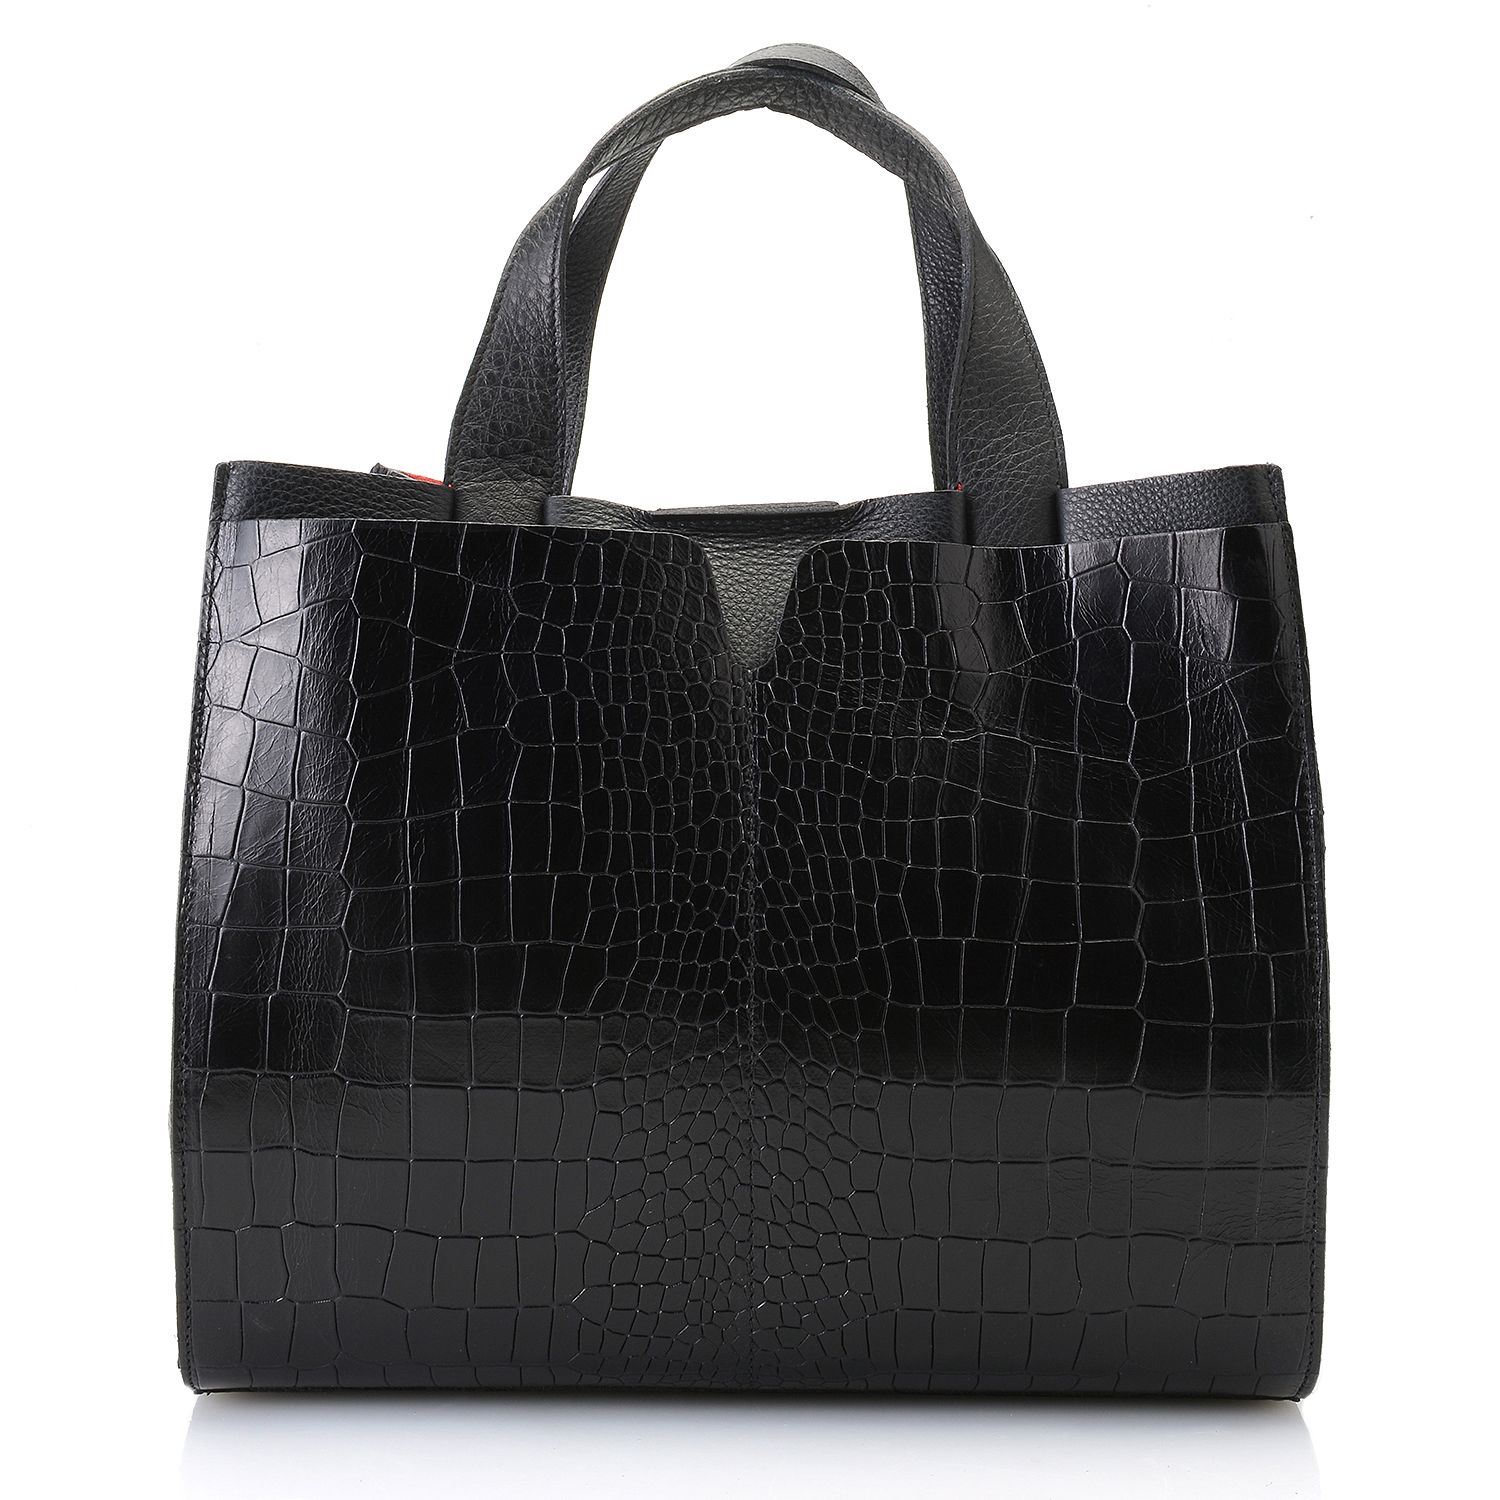 730-106- Pietro NYC "Morgan" Pebbled & Croco Embossed Leather Satchel w/ Strap & Coin Purse